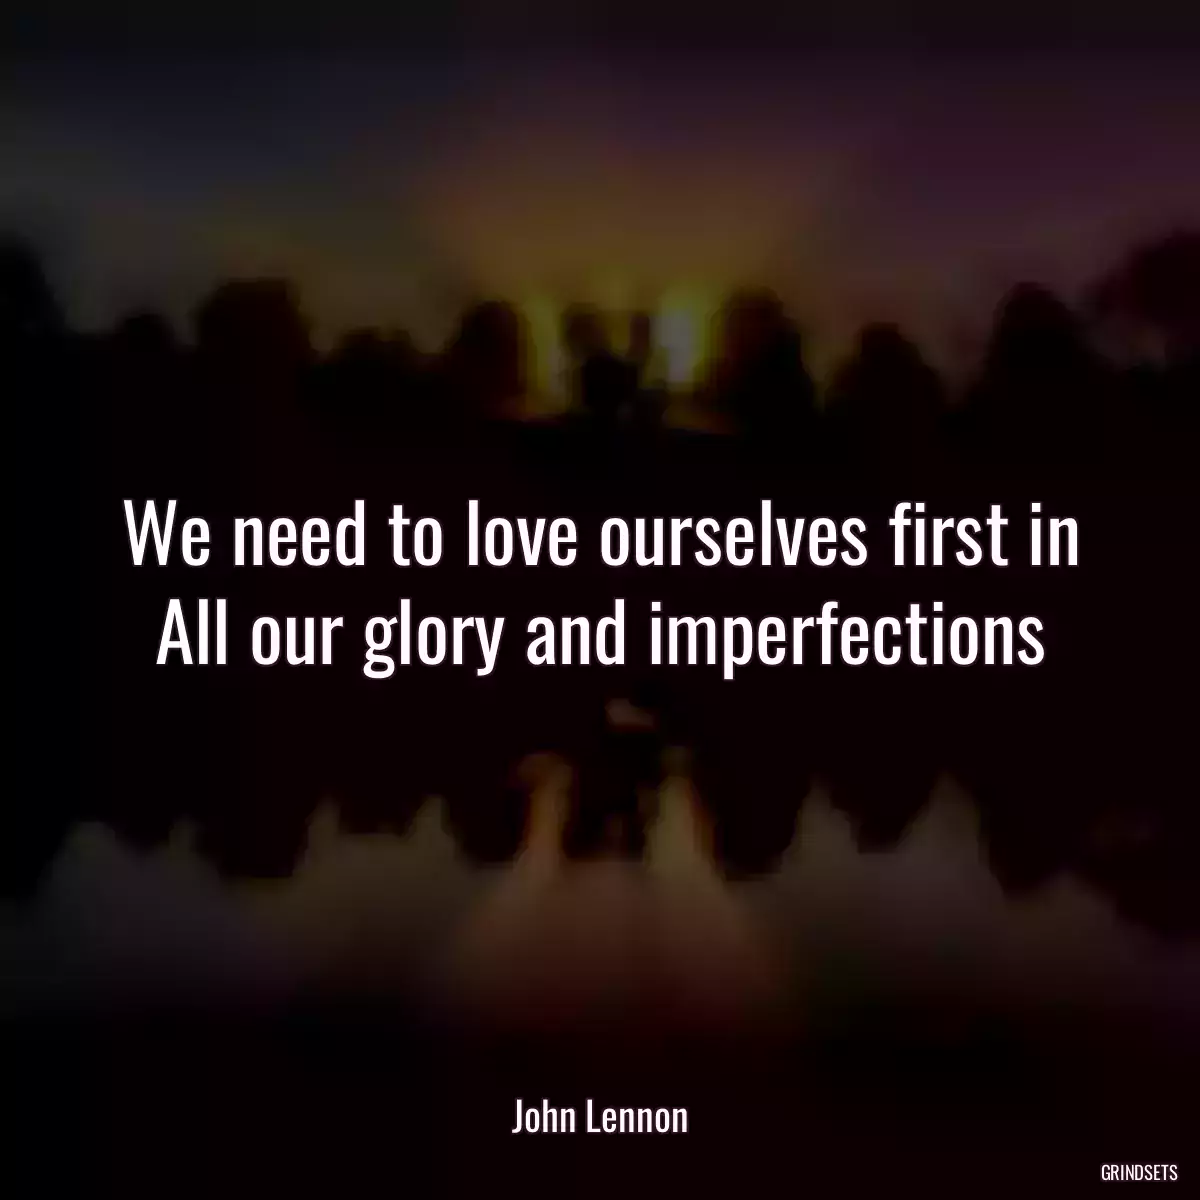 We need to love ourselves first in All our glory and imperfections